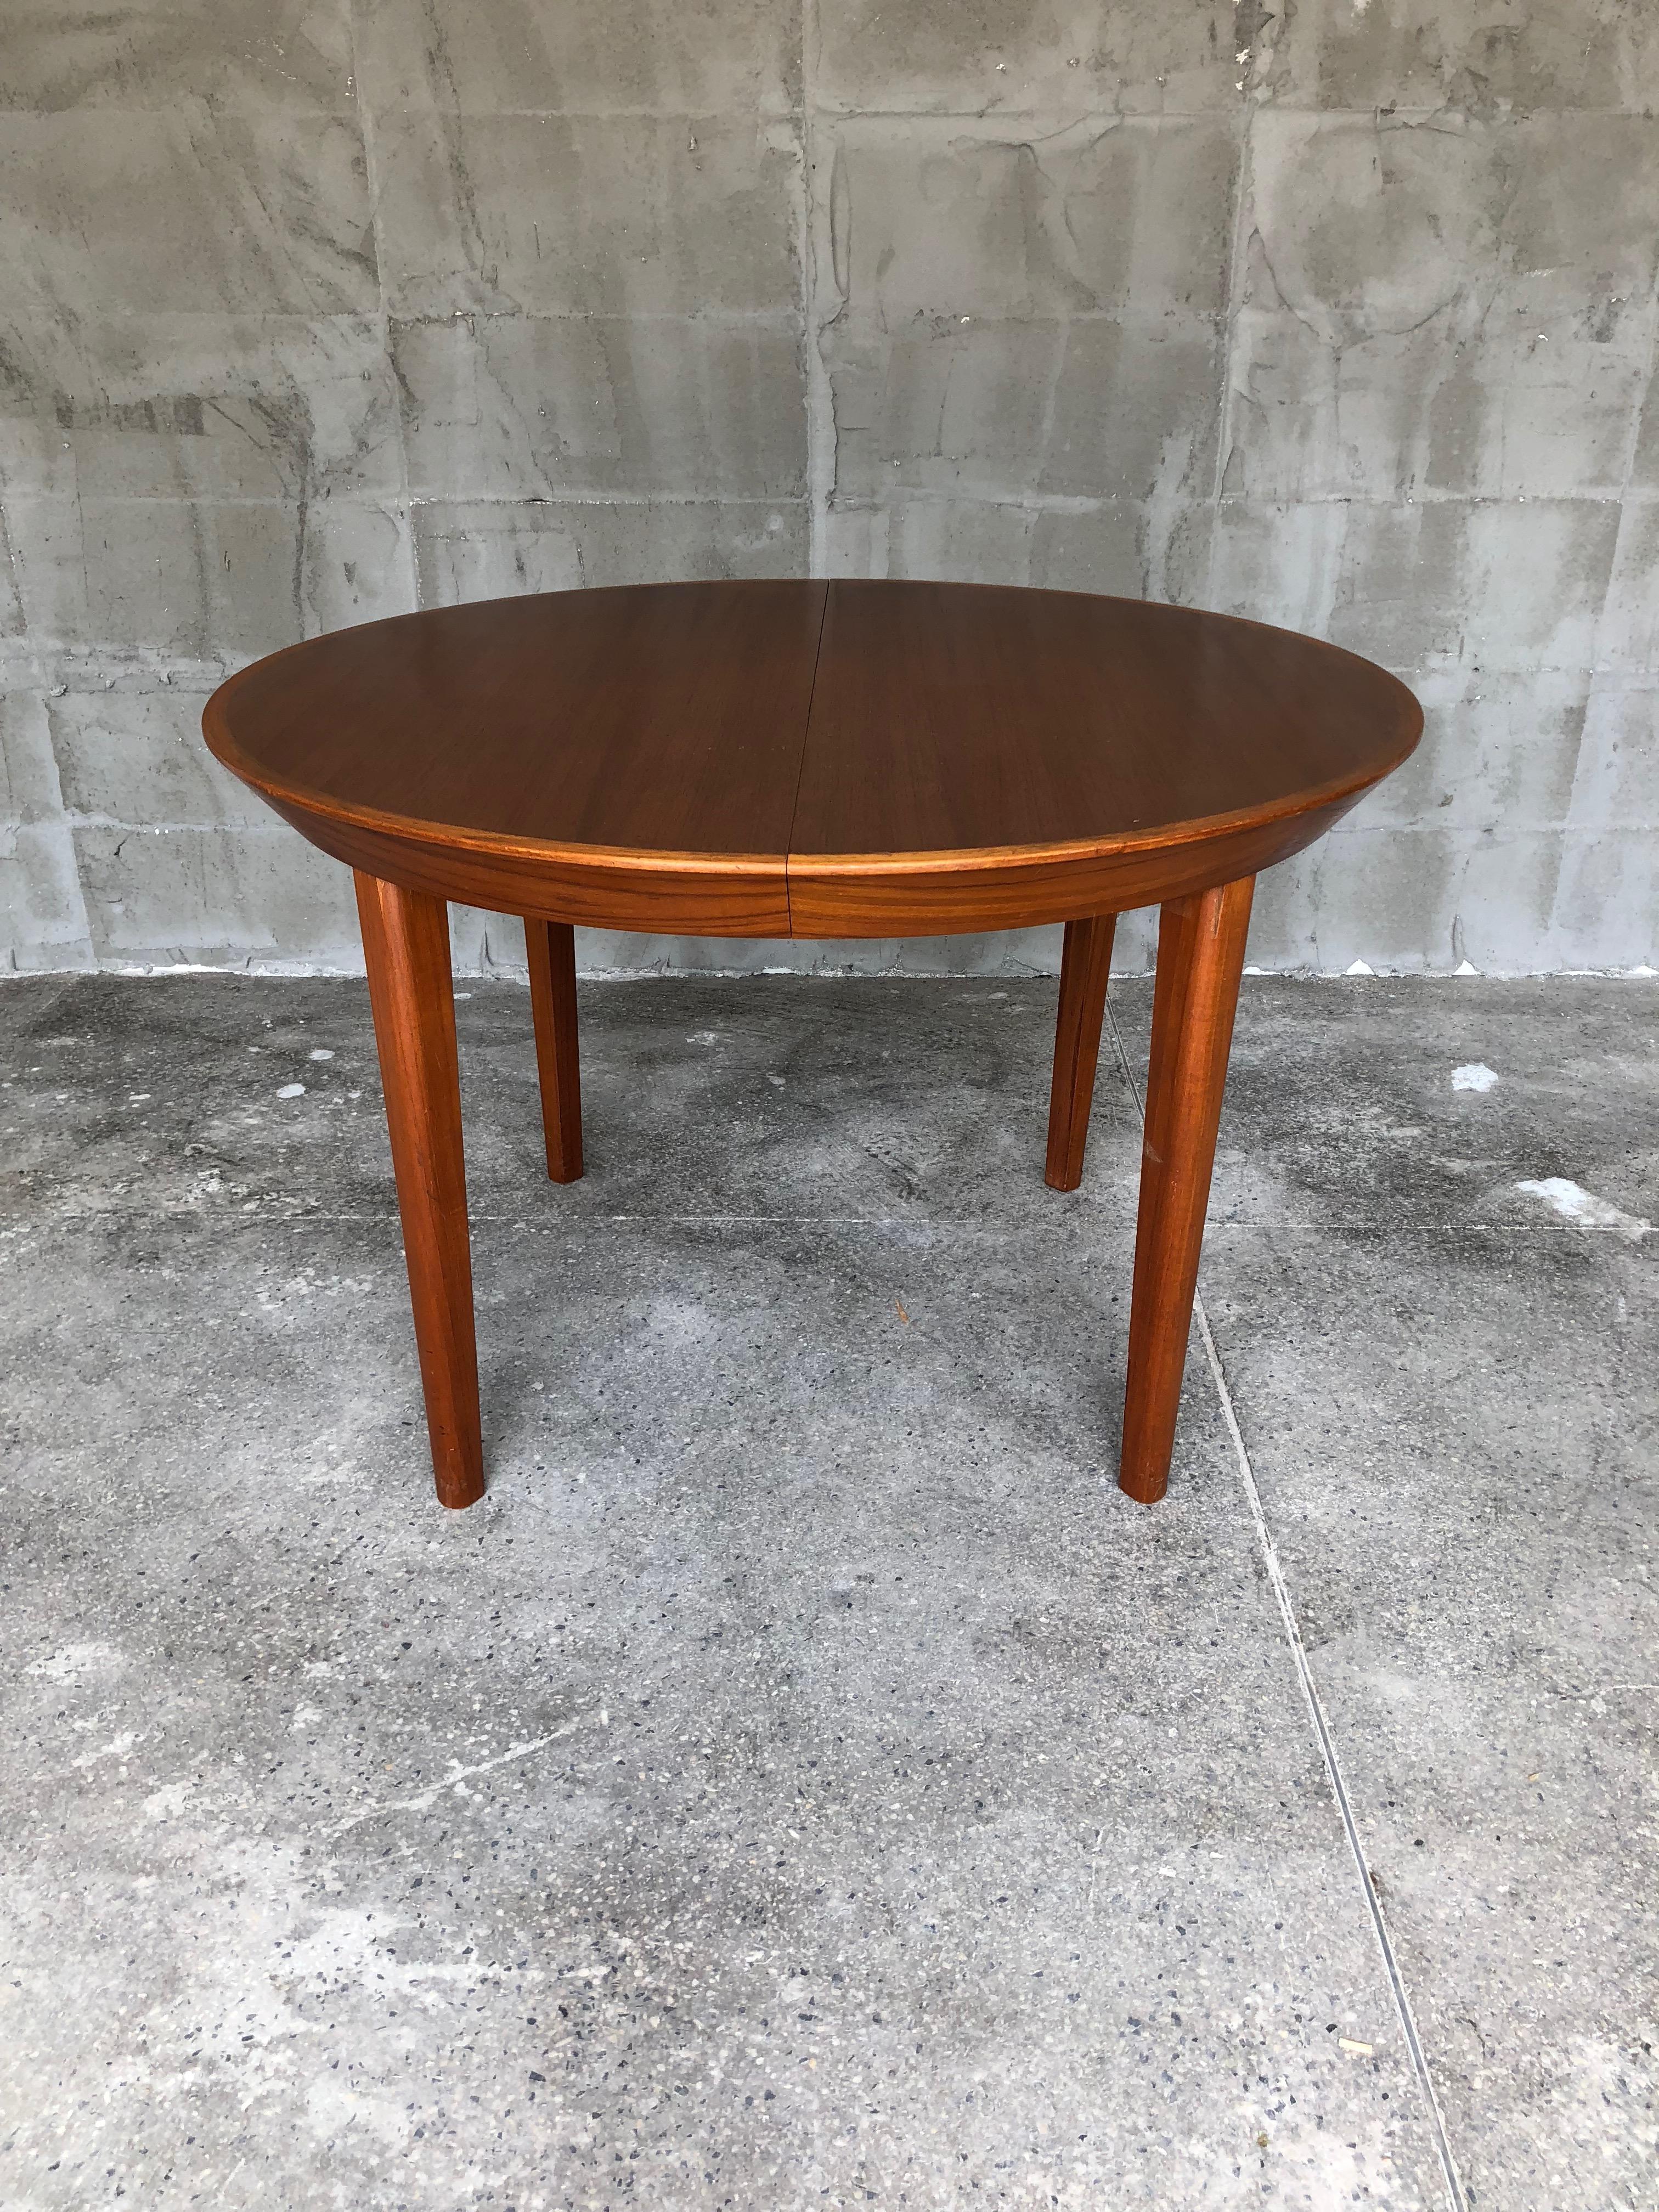 Charming danish extendabe dining table created by the danish designer Ole Hald in the 1960s. The teak table has two extentions that stretch it up to 210 cm. 
The table is in very good condition but has some minor traces of use. There are some small